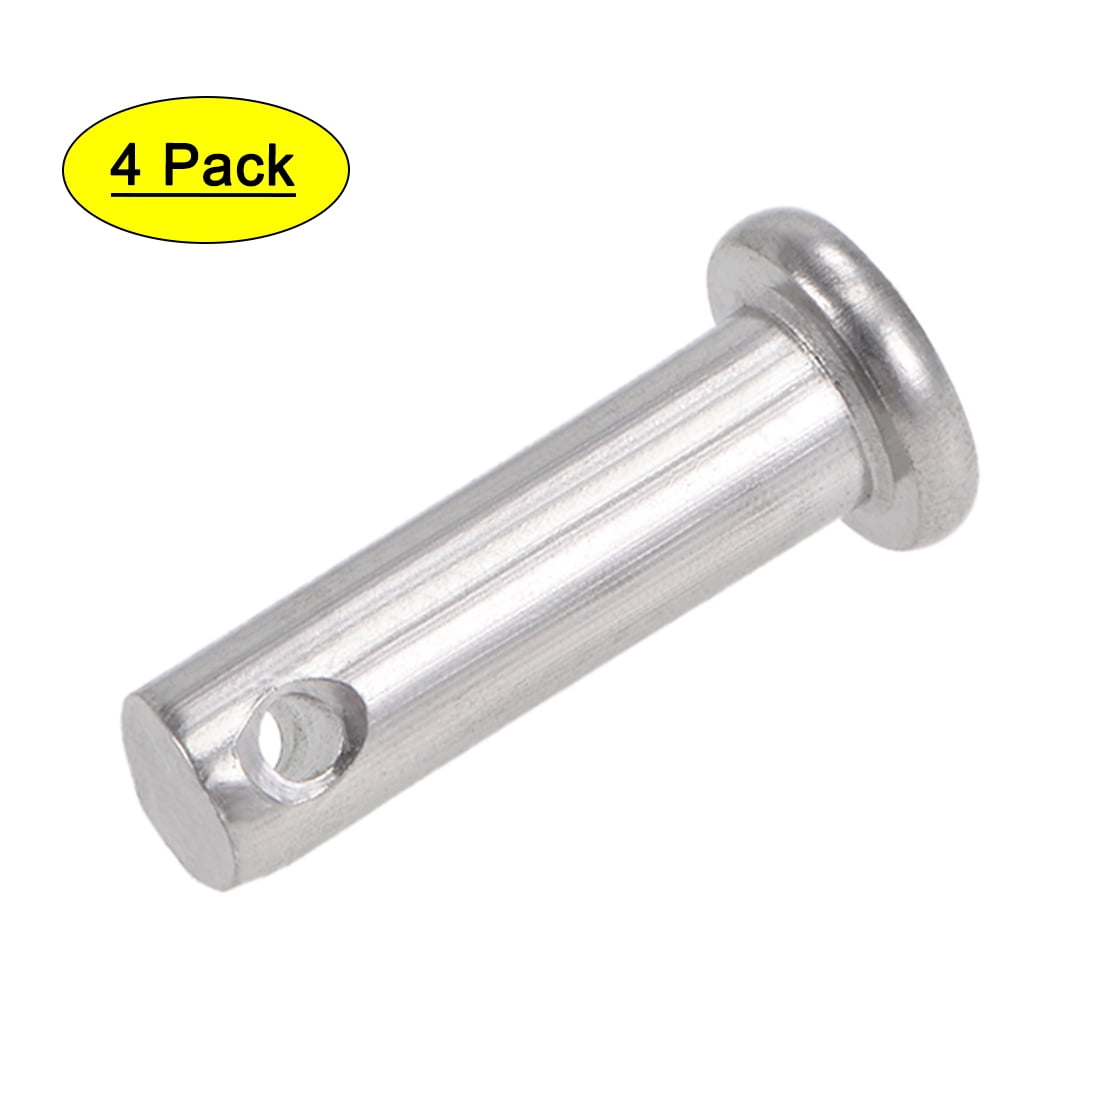 Single Hole Clevis Pins 6mm x 20mm Flat Head 304 Stainless Steel Pin 4Pcs 